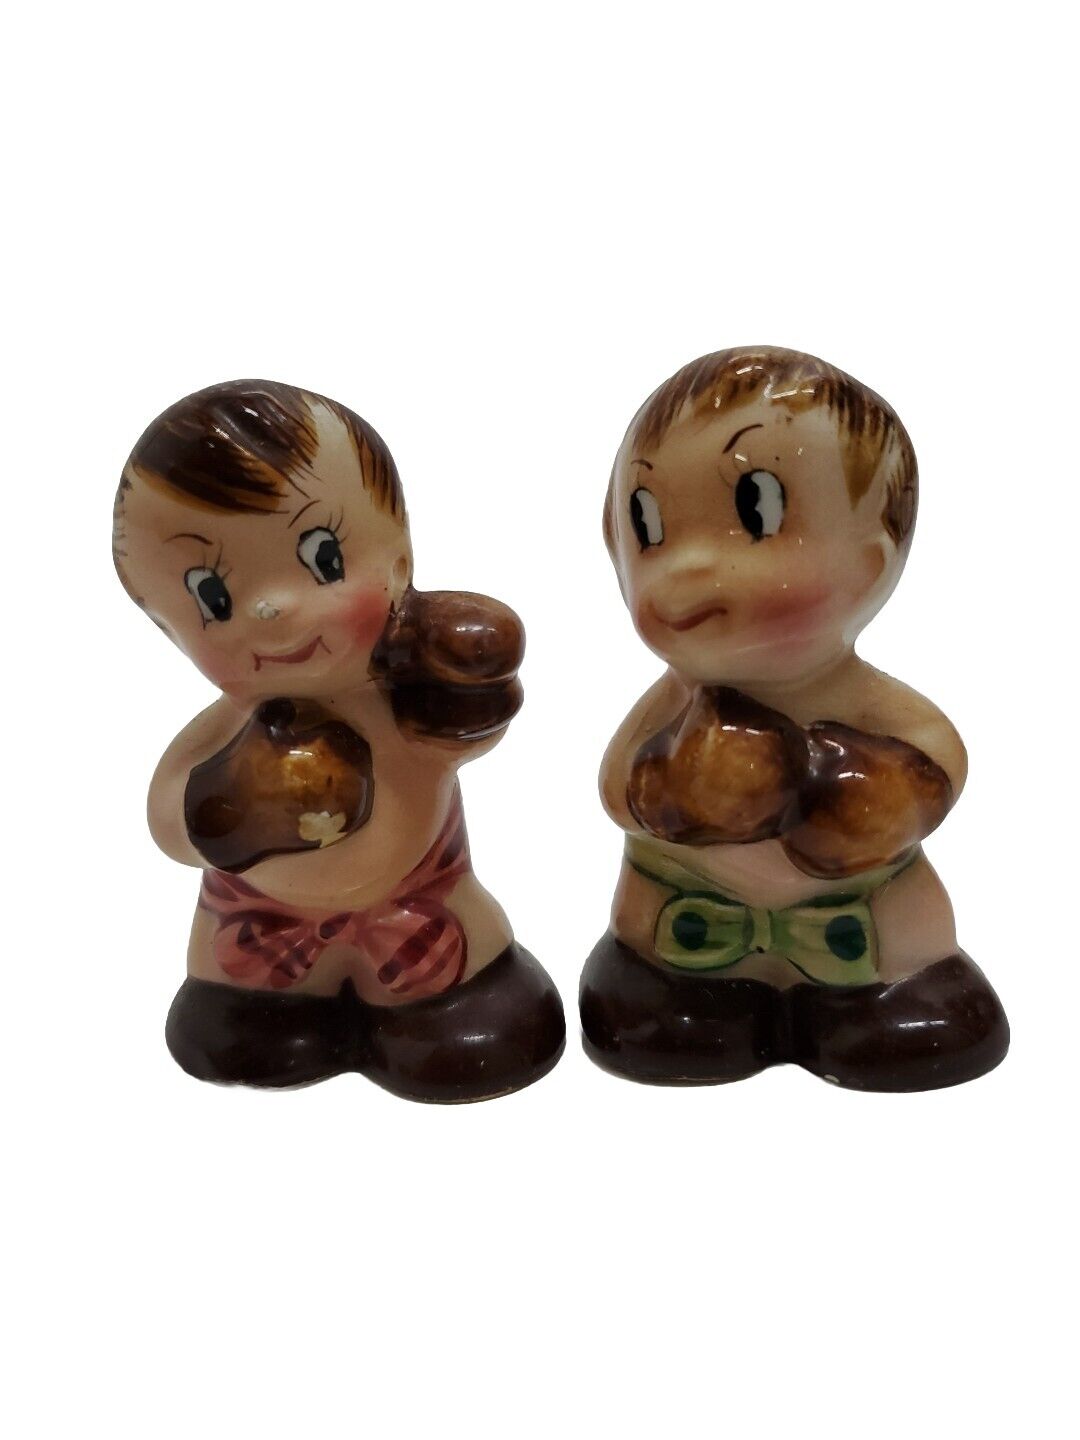 VINTAGE BOXING BOYS PINK AND GREEN DIAPERS SALT & PEPPER SHAKERS UNIQUE VHTF